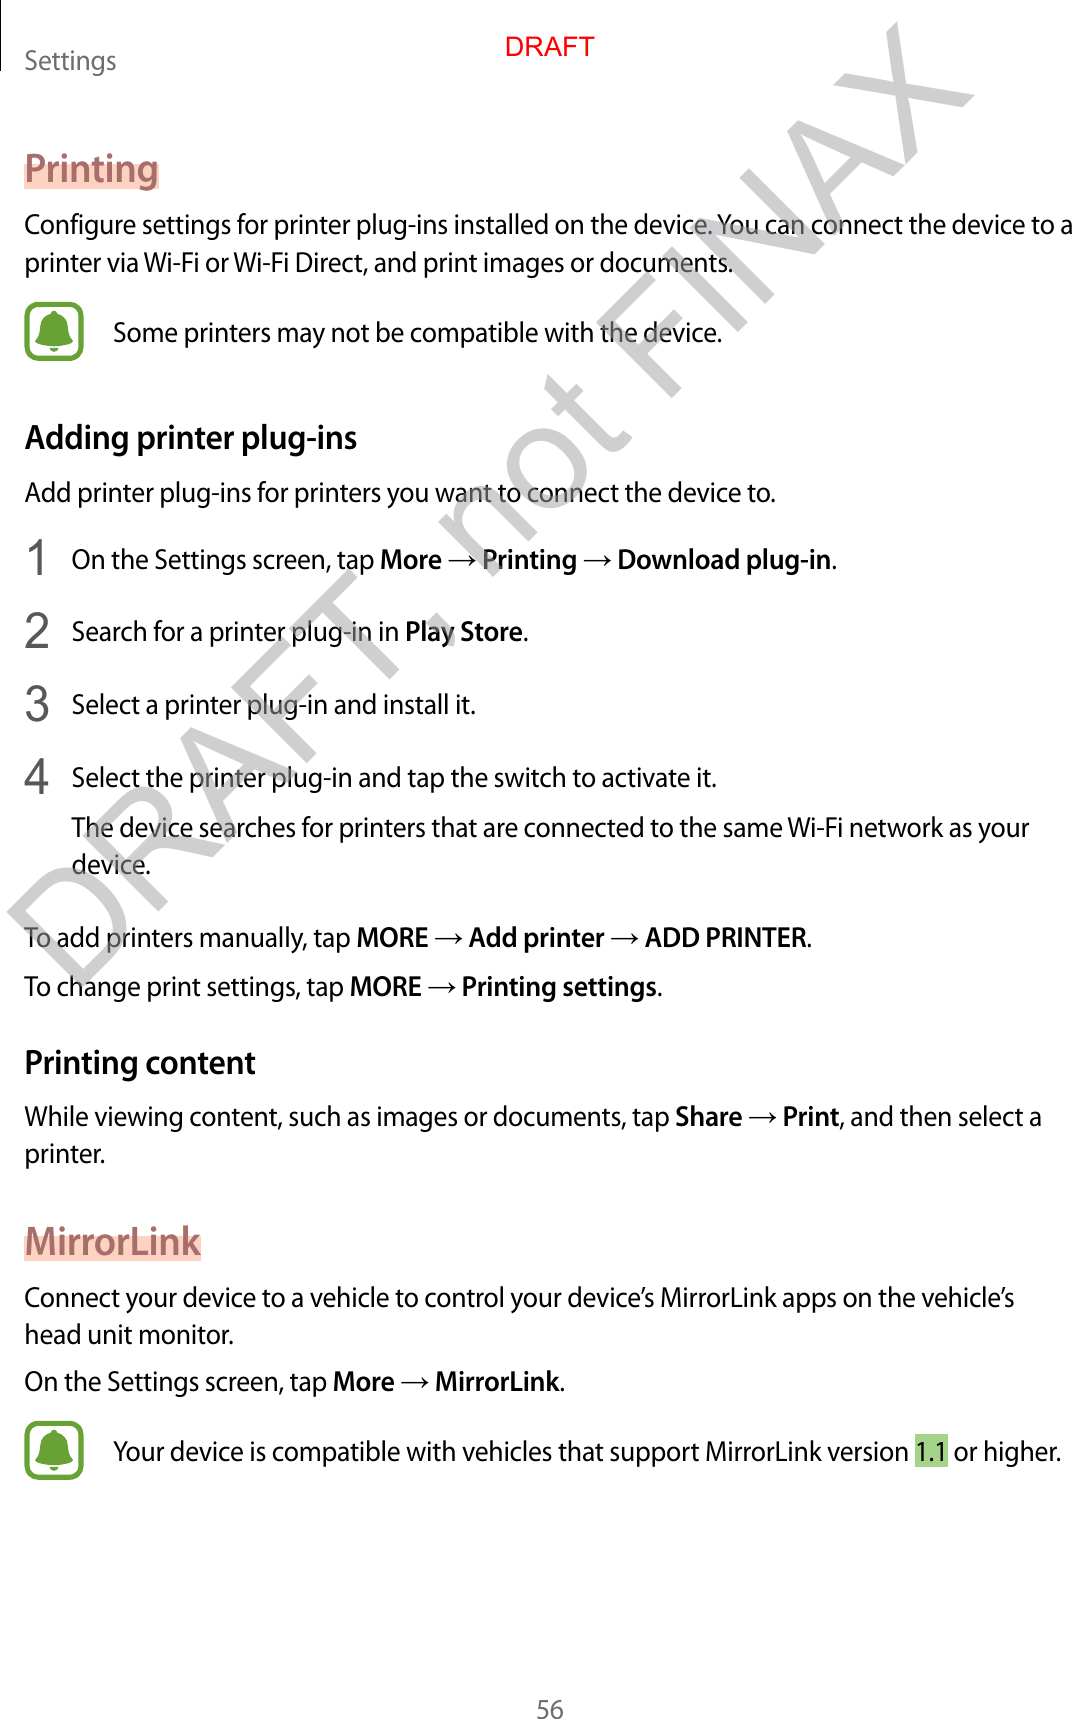 Settings56PrintingConfigure settings for printer plug-ins installed on the device. You can connect the device to a printer via Wi-Fi or Wi-Fi Direct, and print images or documents.Some printers may not be compatible with the device.Adding printer plug-insAdd printer plug-ins for printers you want to connect the device to.1  On the Settings screen, tap More → Printing → Download plug-in.2  Search for a printer plug-in in Play Store.3  Select a printer plug-in and install it.4  Select the printer plug-in and tap the switch to activate it.The device searches for printers that are connected to the same Wi-Fi network as your device.To add printers manually, tap MORE → Add printer → ADD PRINTER.To change print settings, tap MORE → Printing settings.Printing contentWhile viewing content, such as images or documents, tap Share → Print, and then select a printer.MirrorLinkConnect your device to a vehicle to control your device’s MirrorLink apps on the vehicle’s head unit monitor.On the Settings screen, tap More → MirrorLink.Your device is compatible with vehicles that support MirrorLink version 1.1 or higher.DRAFTDRAFT, not FINAX